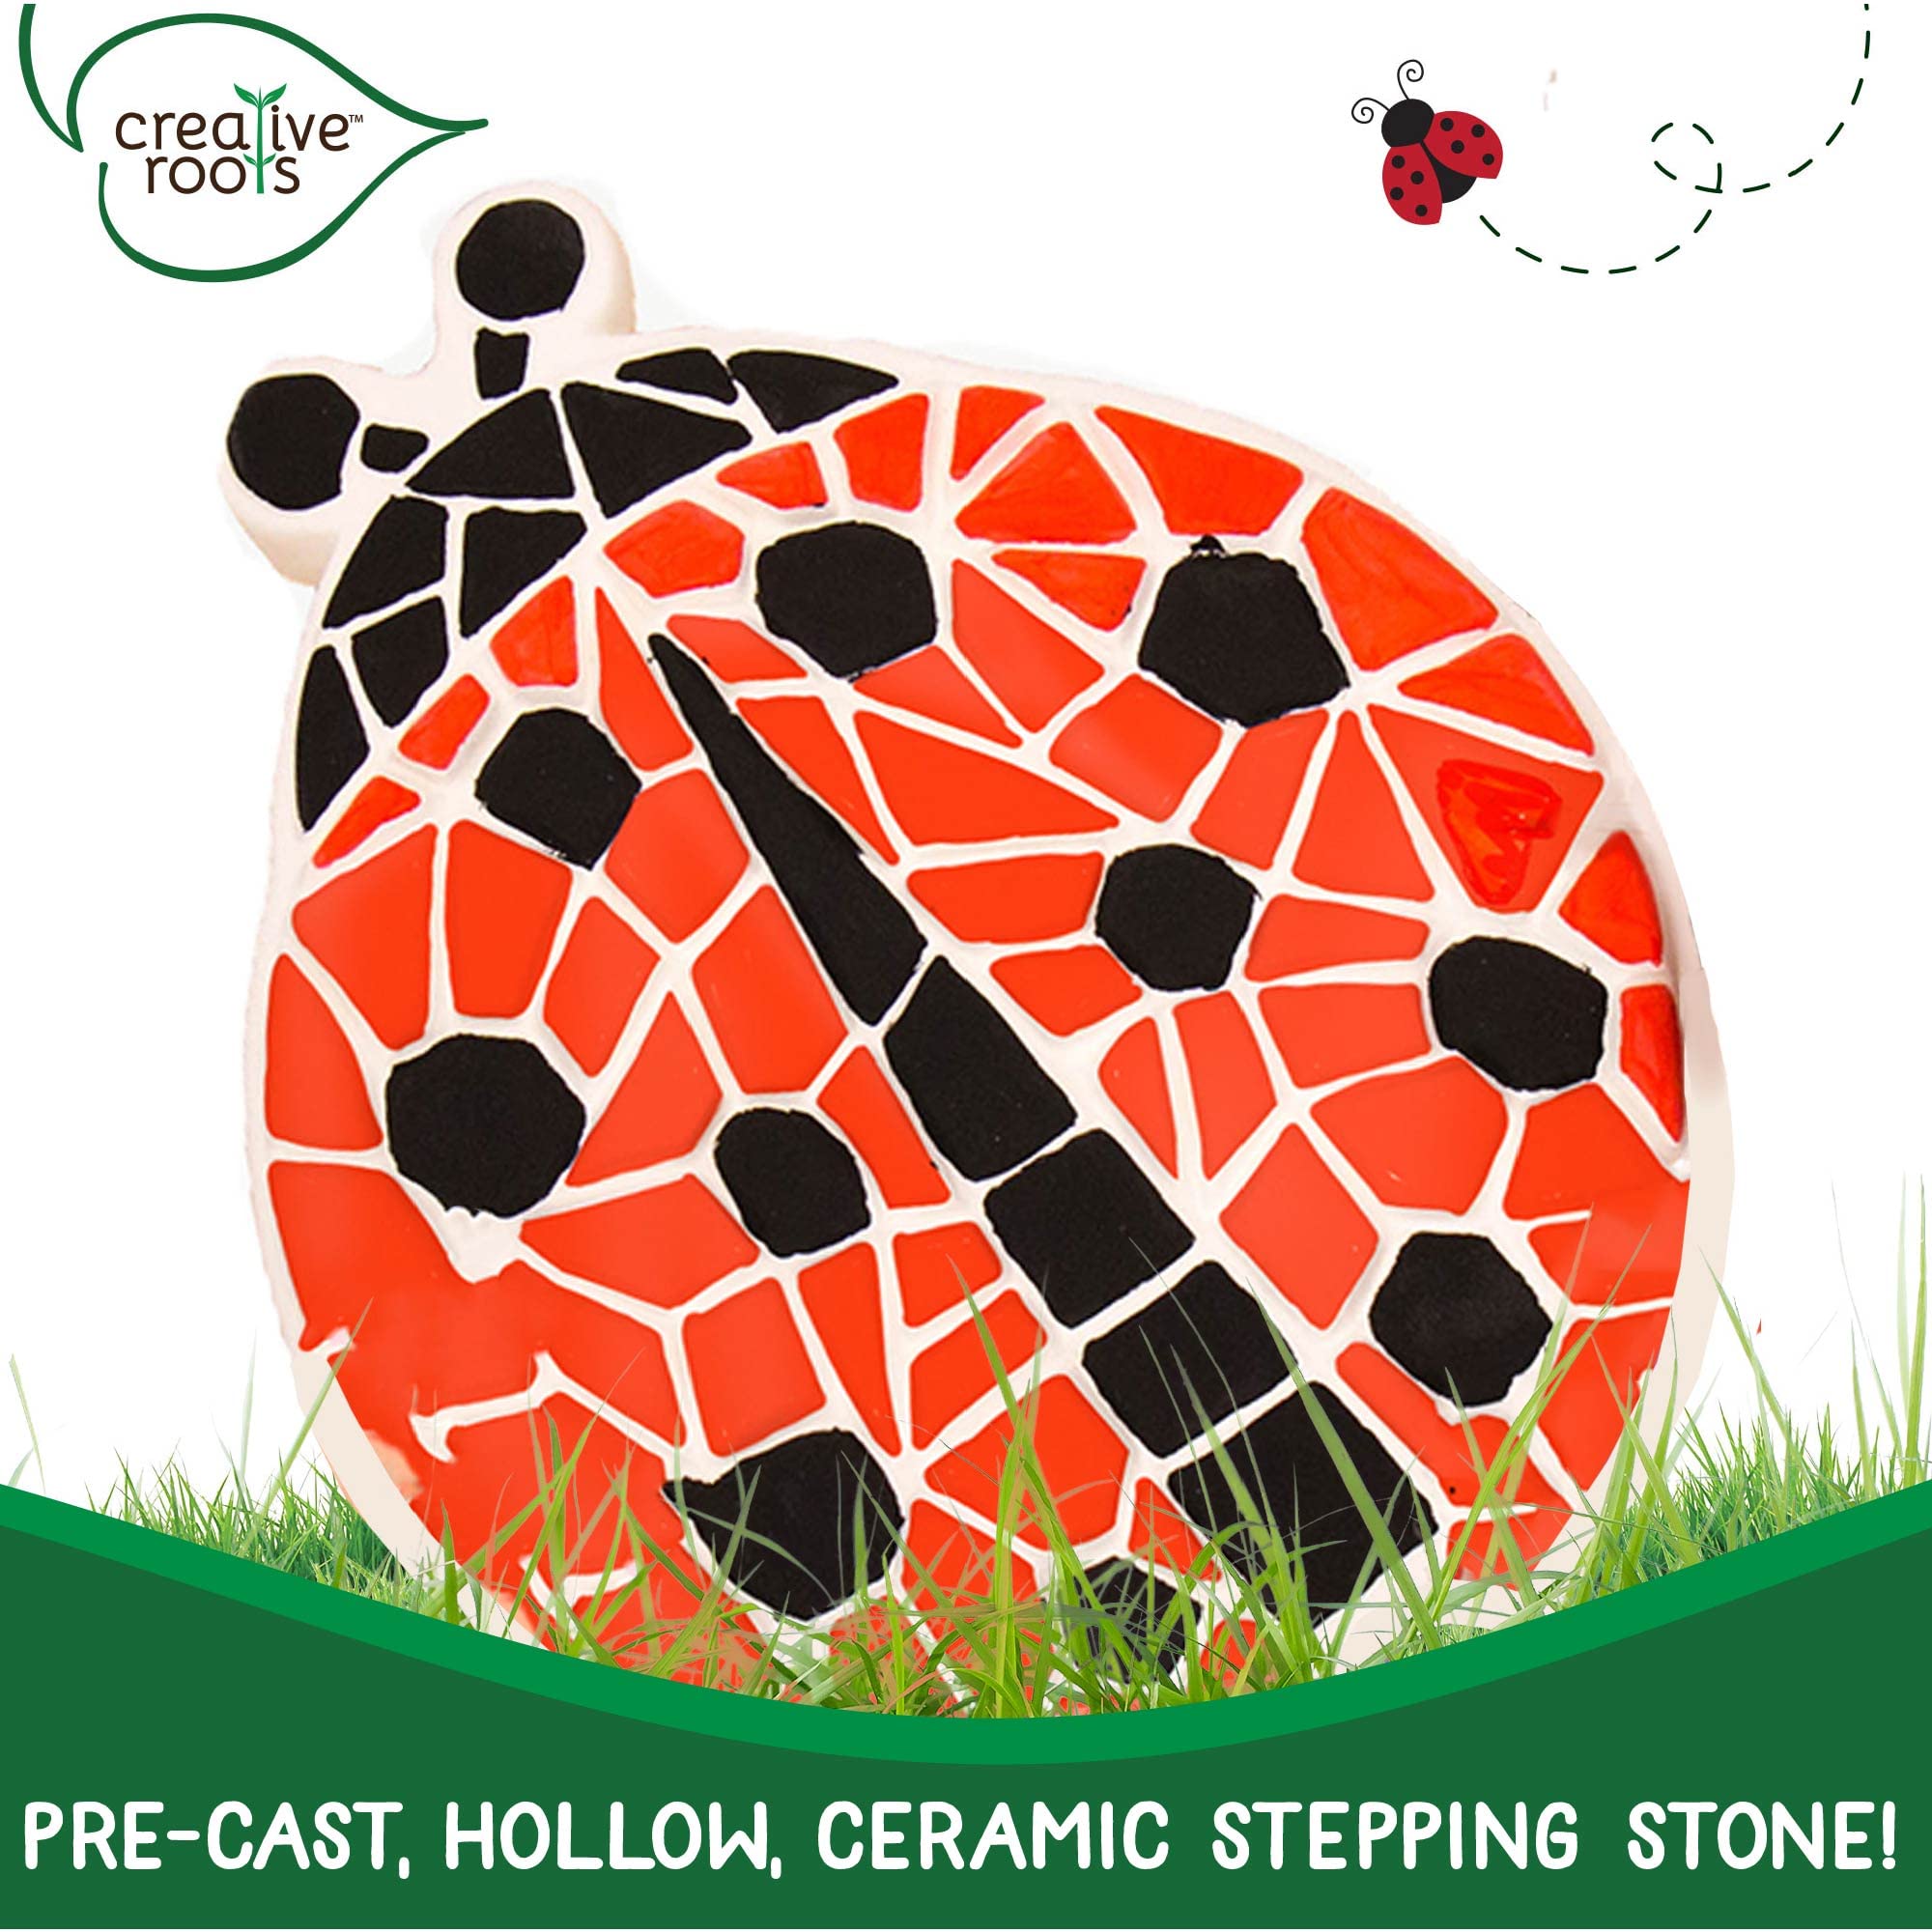 Creative Roots Mosaic Ladybug Stone, Includes 7-Inch Ceramic Stepping Stone & 6 Vibrant Paints, DIY Garden Stepping Stone Kit for Kids Ages 6+